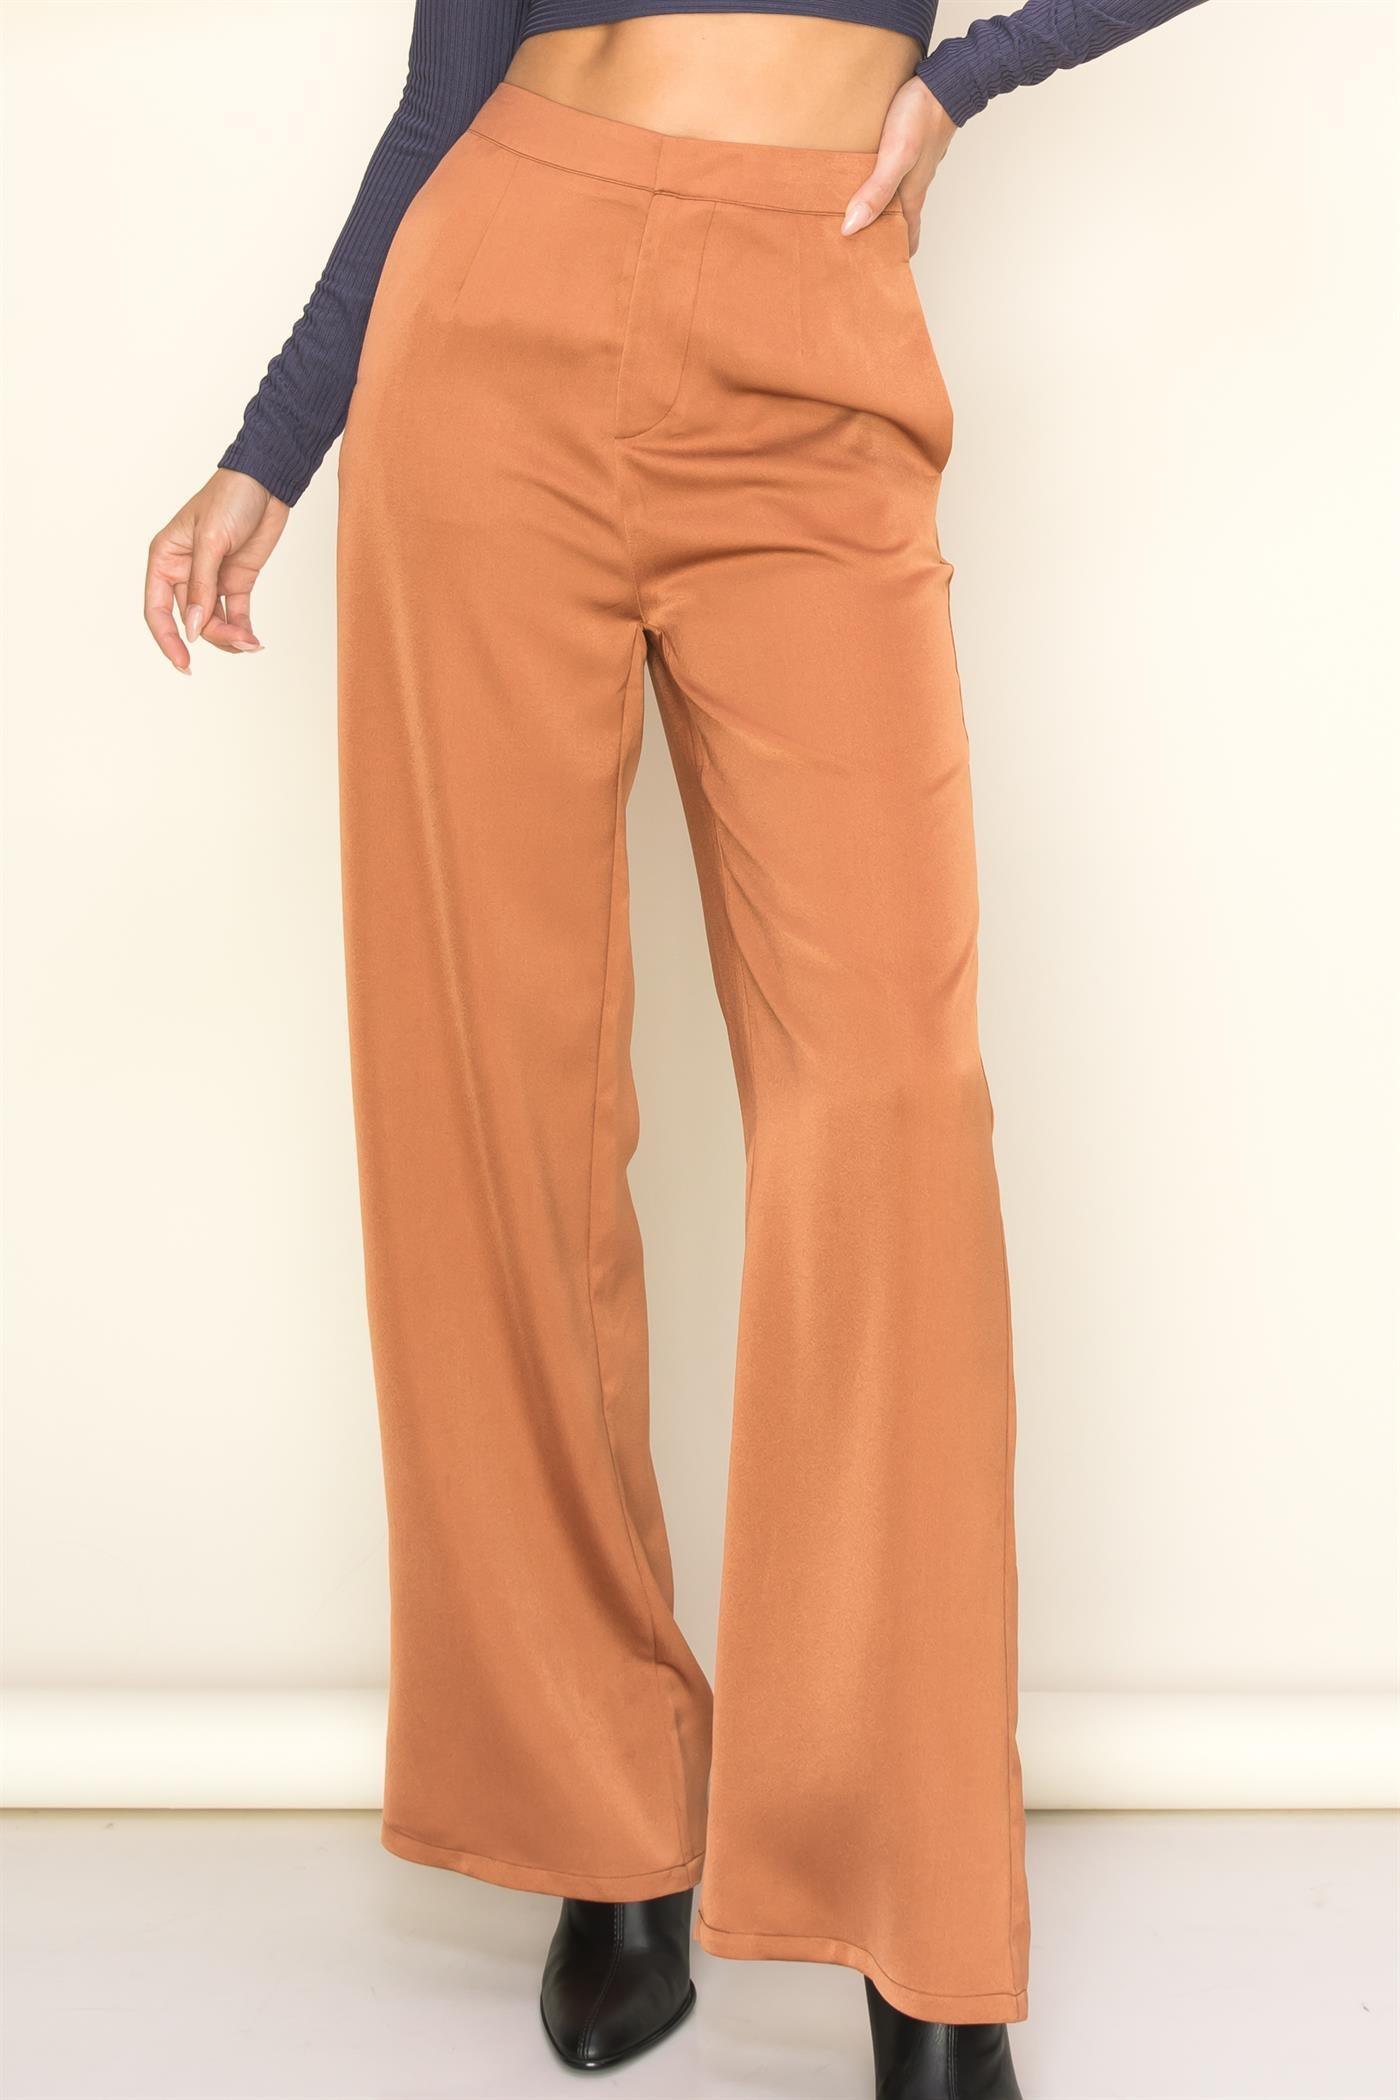 high waist wide leg trousers - RK Collections Boutique